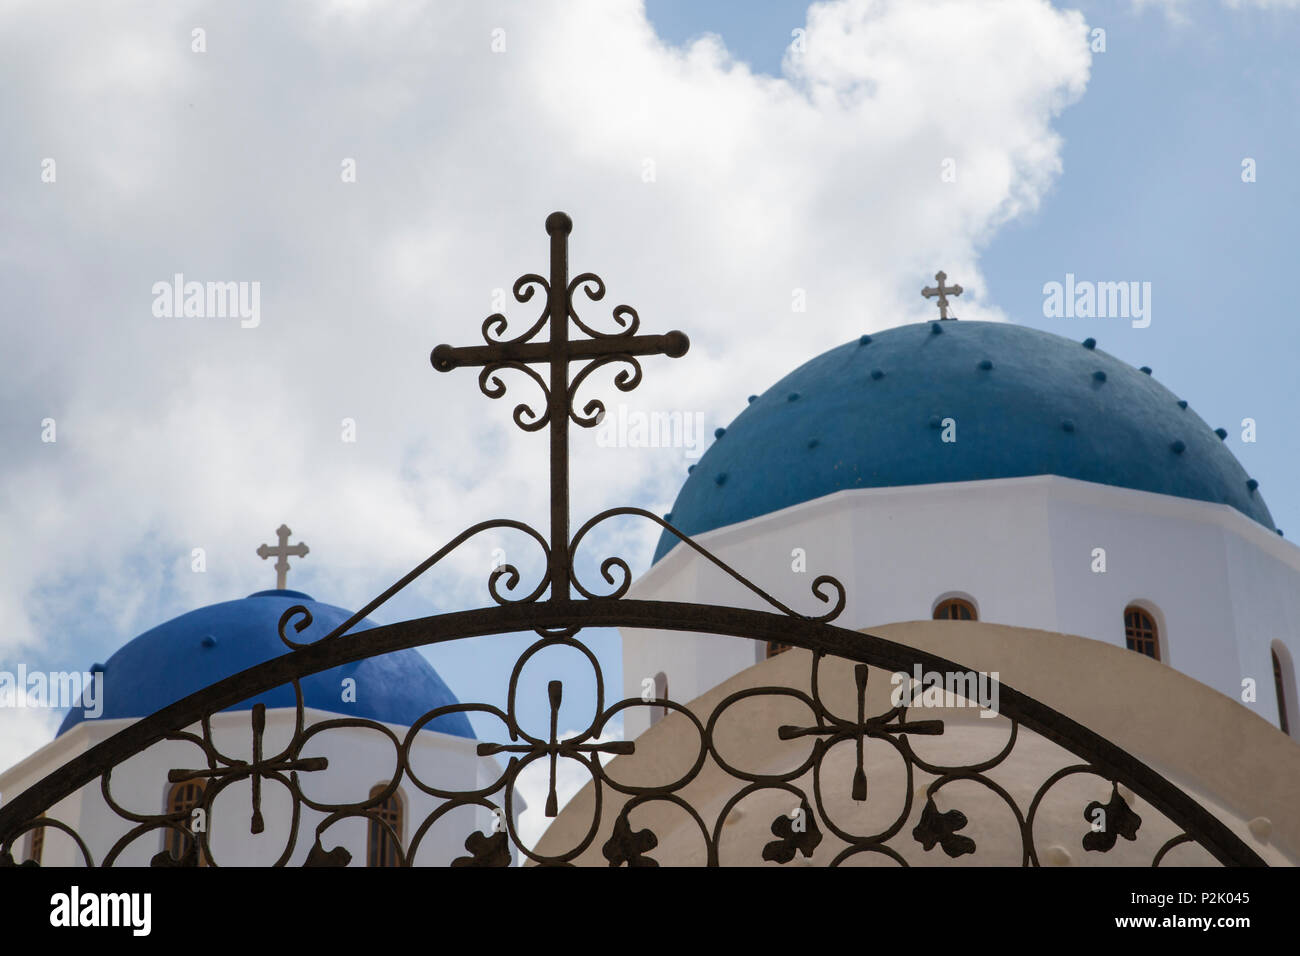 wrought-iron gate with cross in front of blue painted domed church chapel on greek isalnd santorin Stock Photo